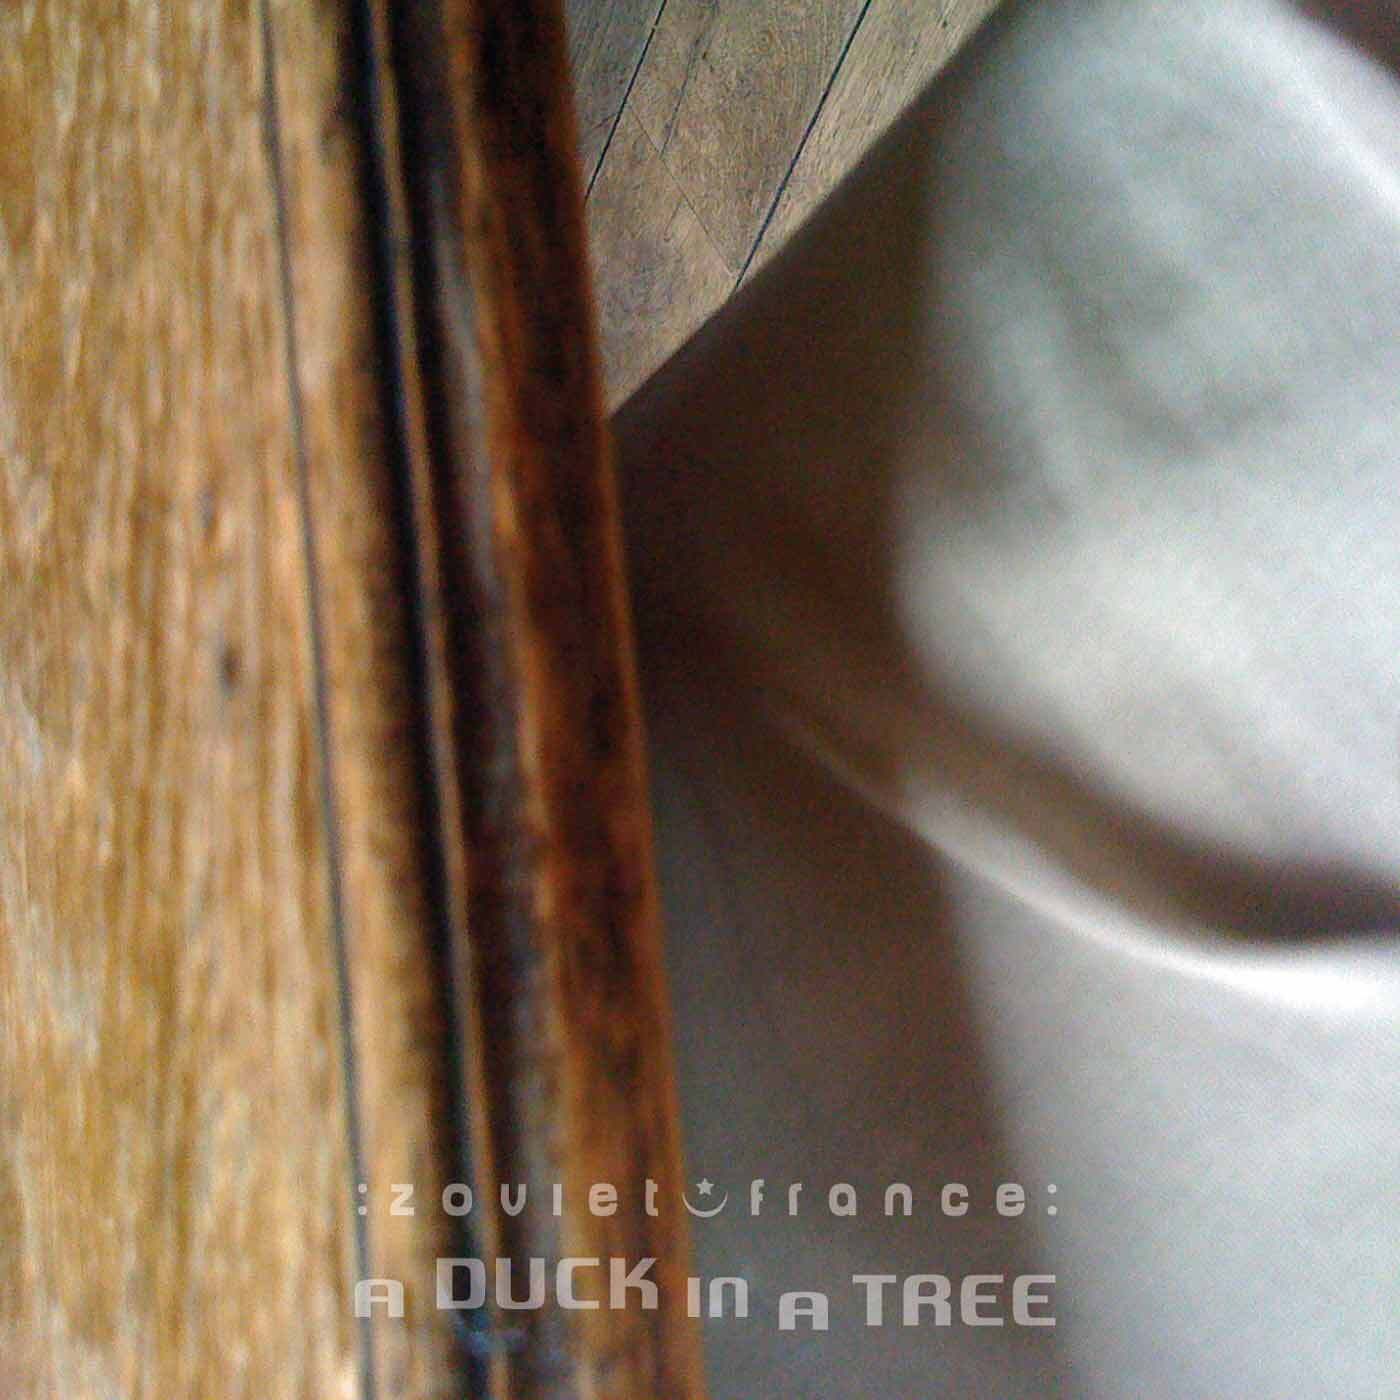 A-Duck-in-a-Tree-2014-07-19-_-Within-the